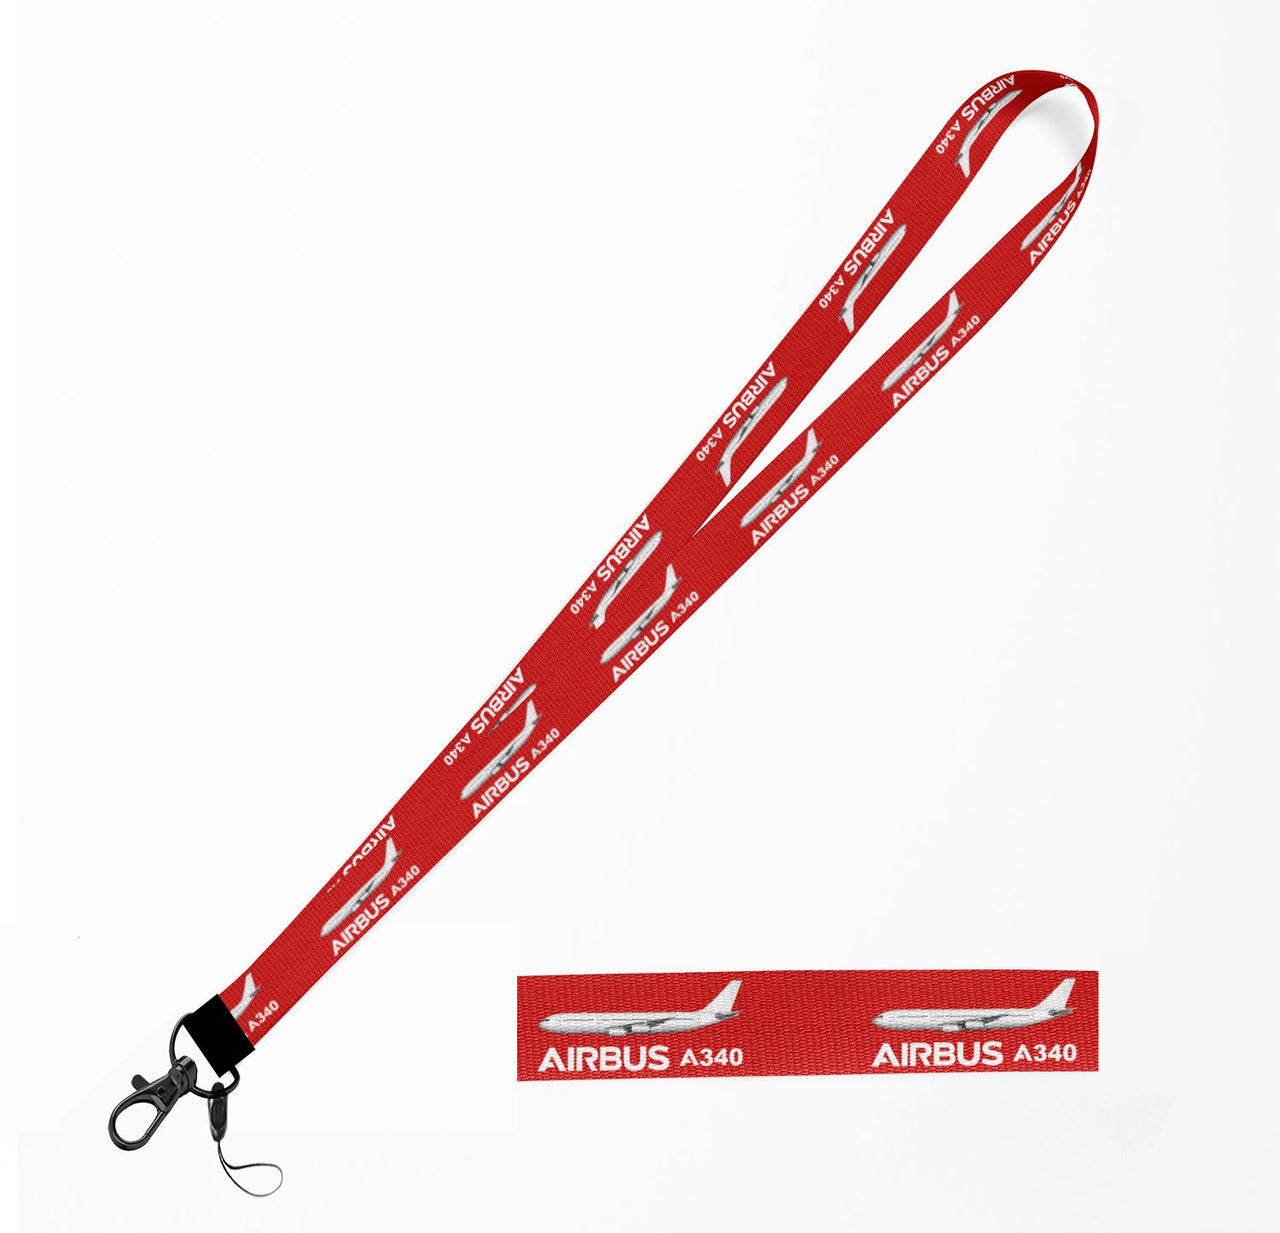 The Airbus A340 Designed Lanyard & ID Holders